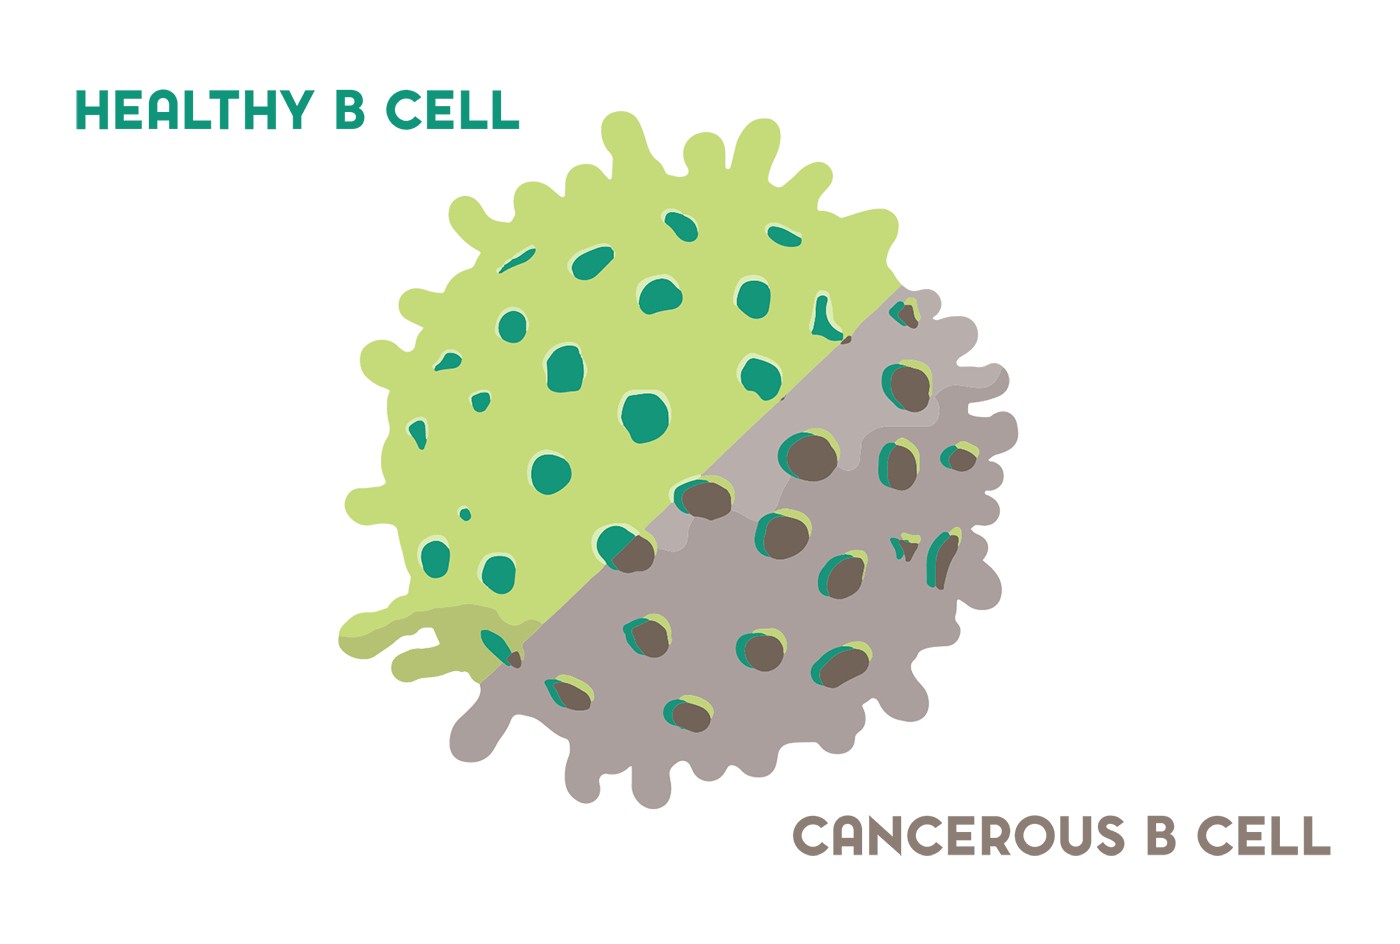 Healthy B cell vs. cancerous B cell